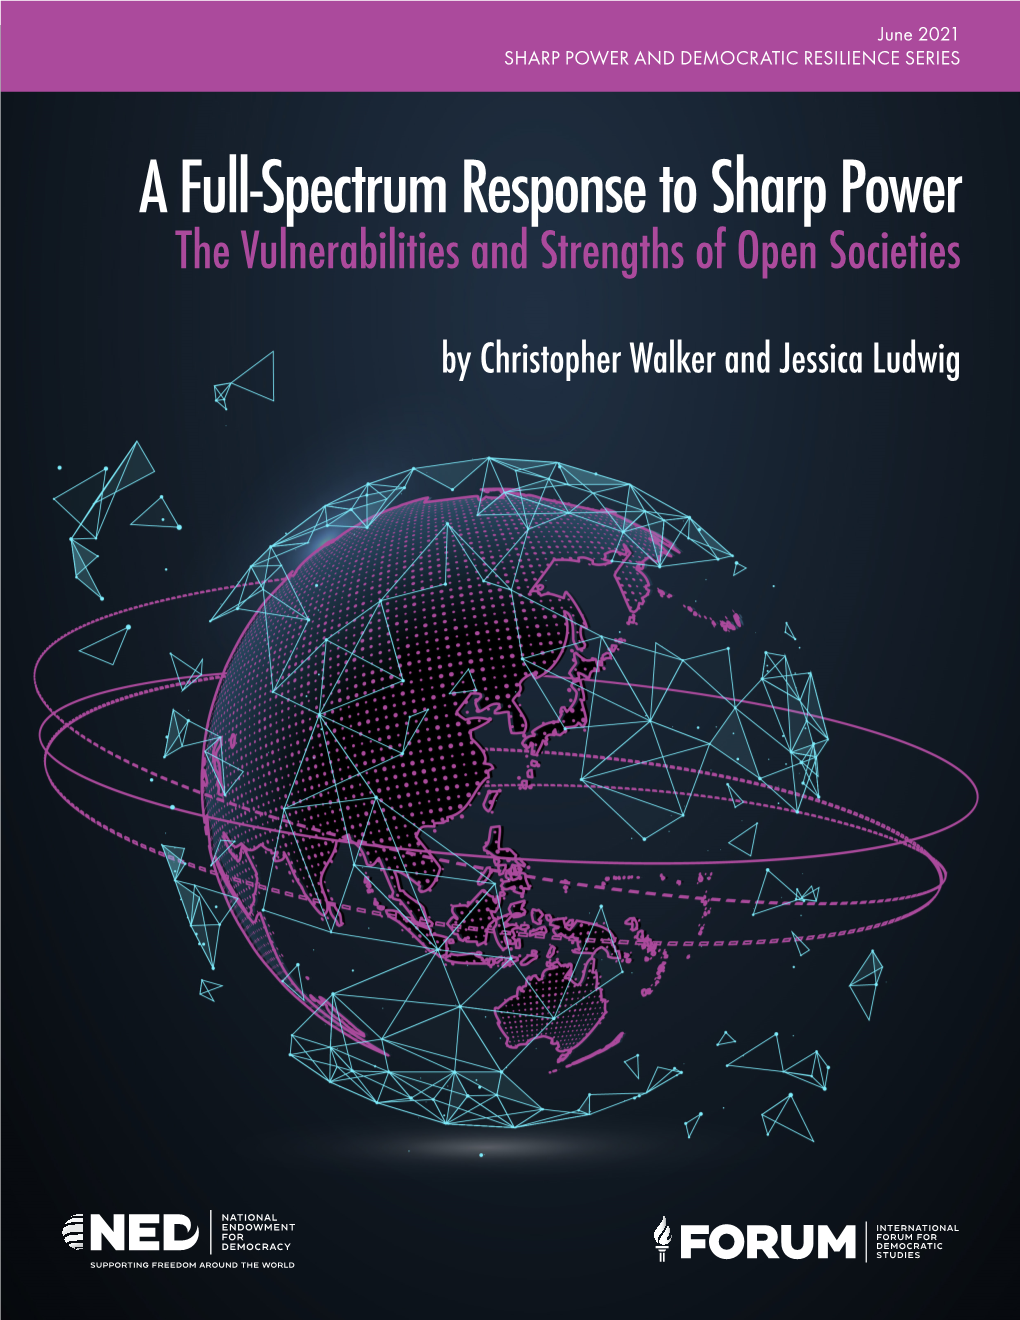 A Full-Spectrum Response to Sharp Power the Vulnerabilities and Strengths of Open Societies